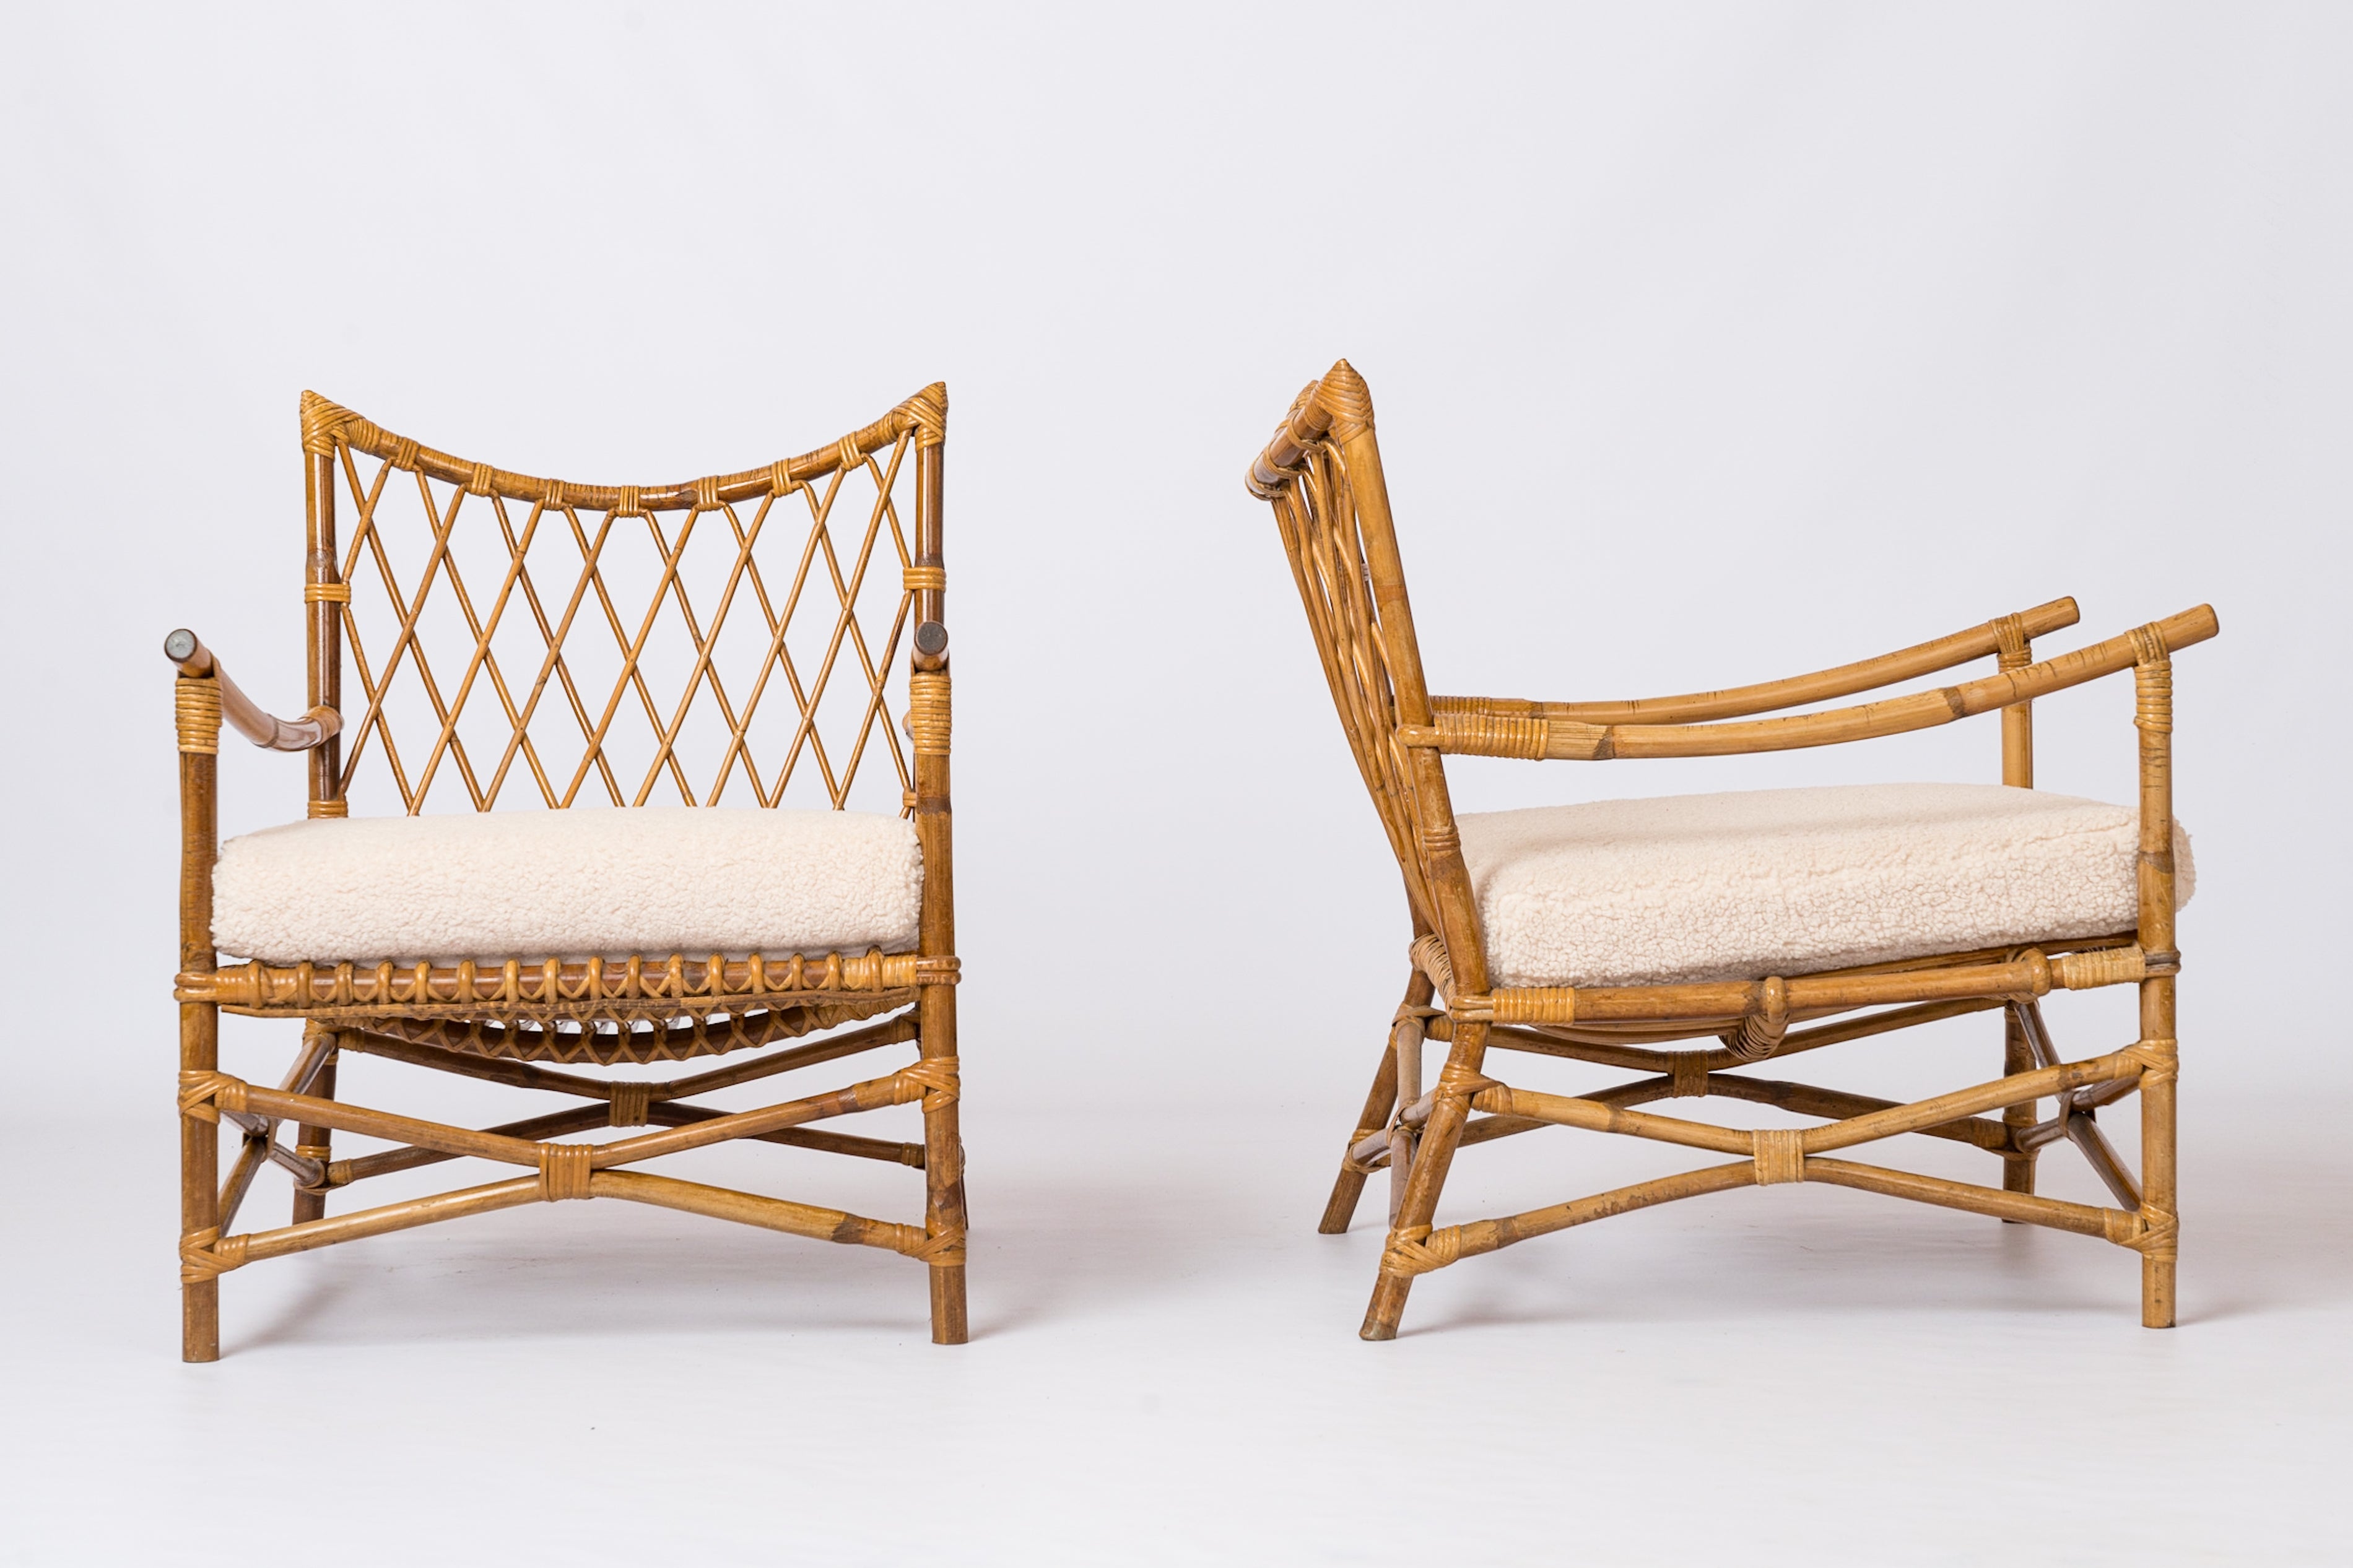 Pair of Braided Rattan Lounge Armchairs w. Off-White Boucle Cushions - 1960's